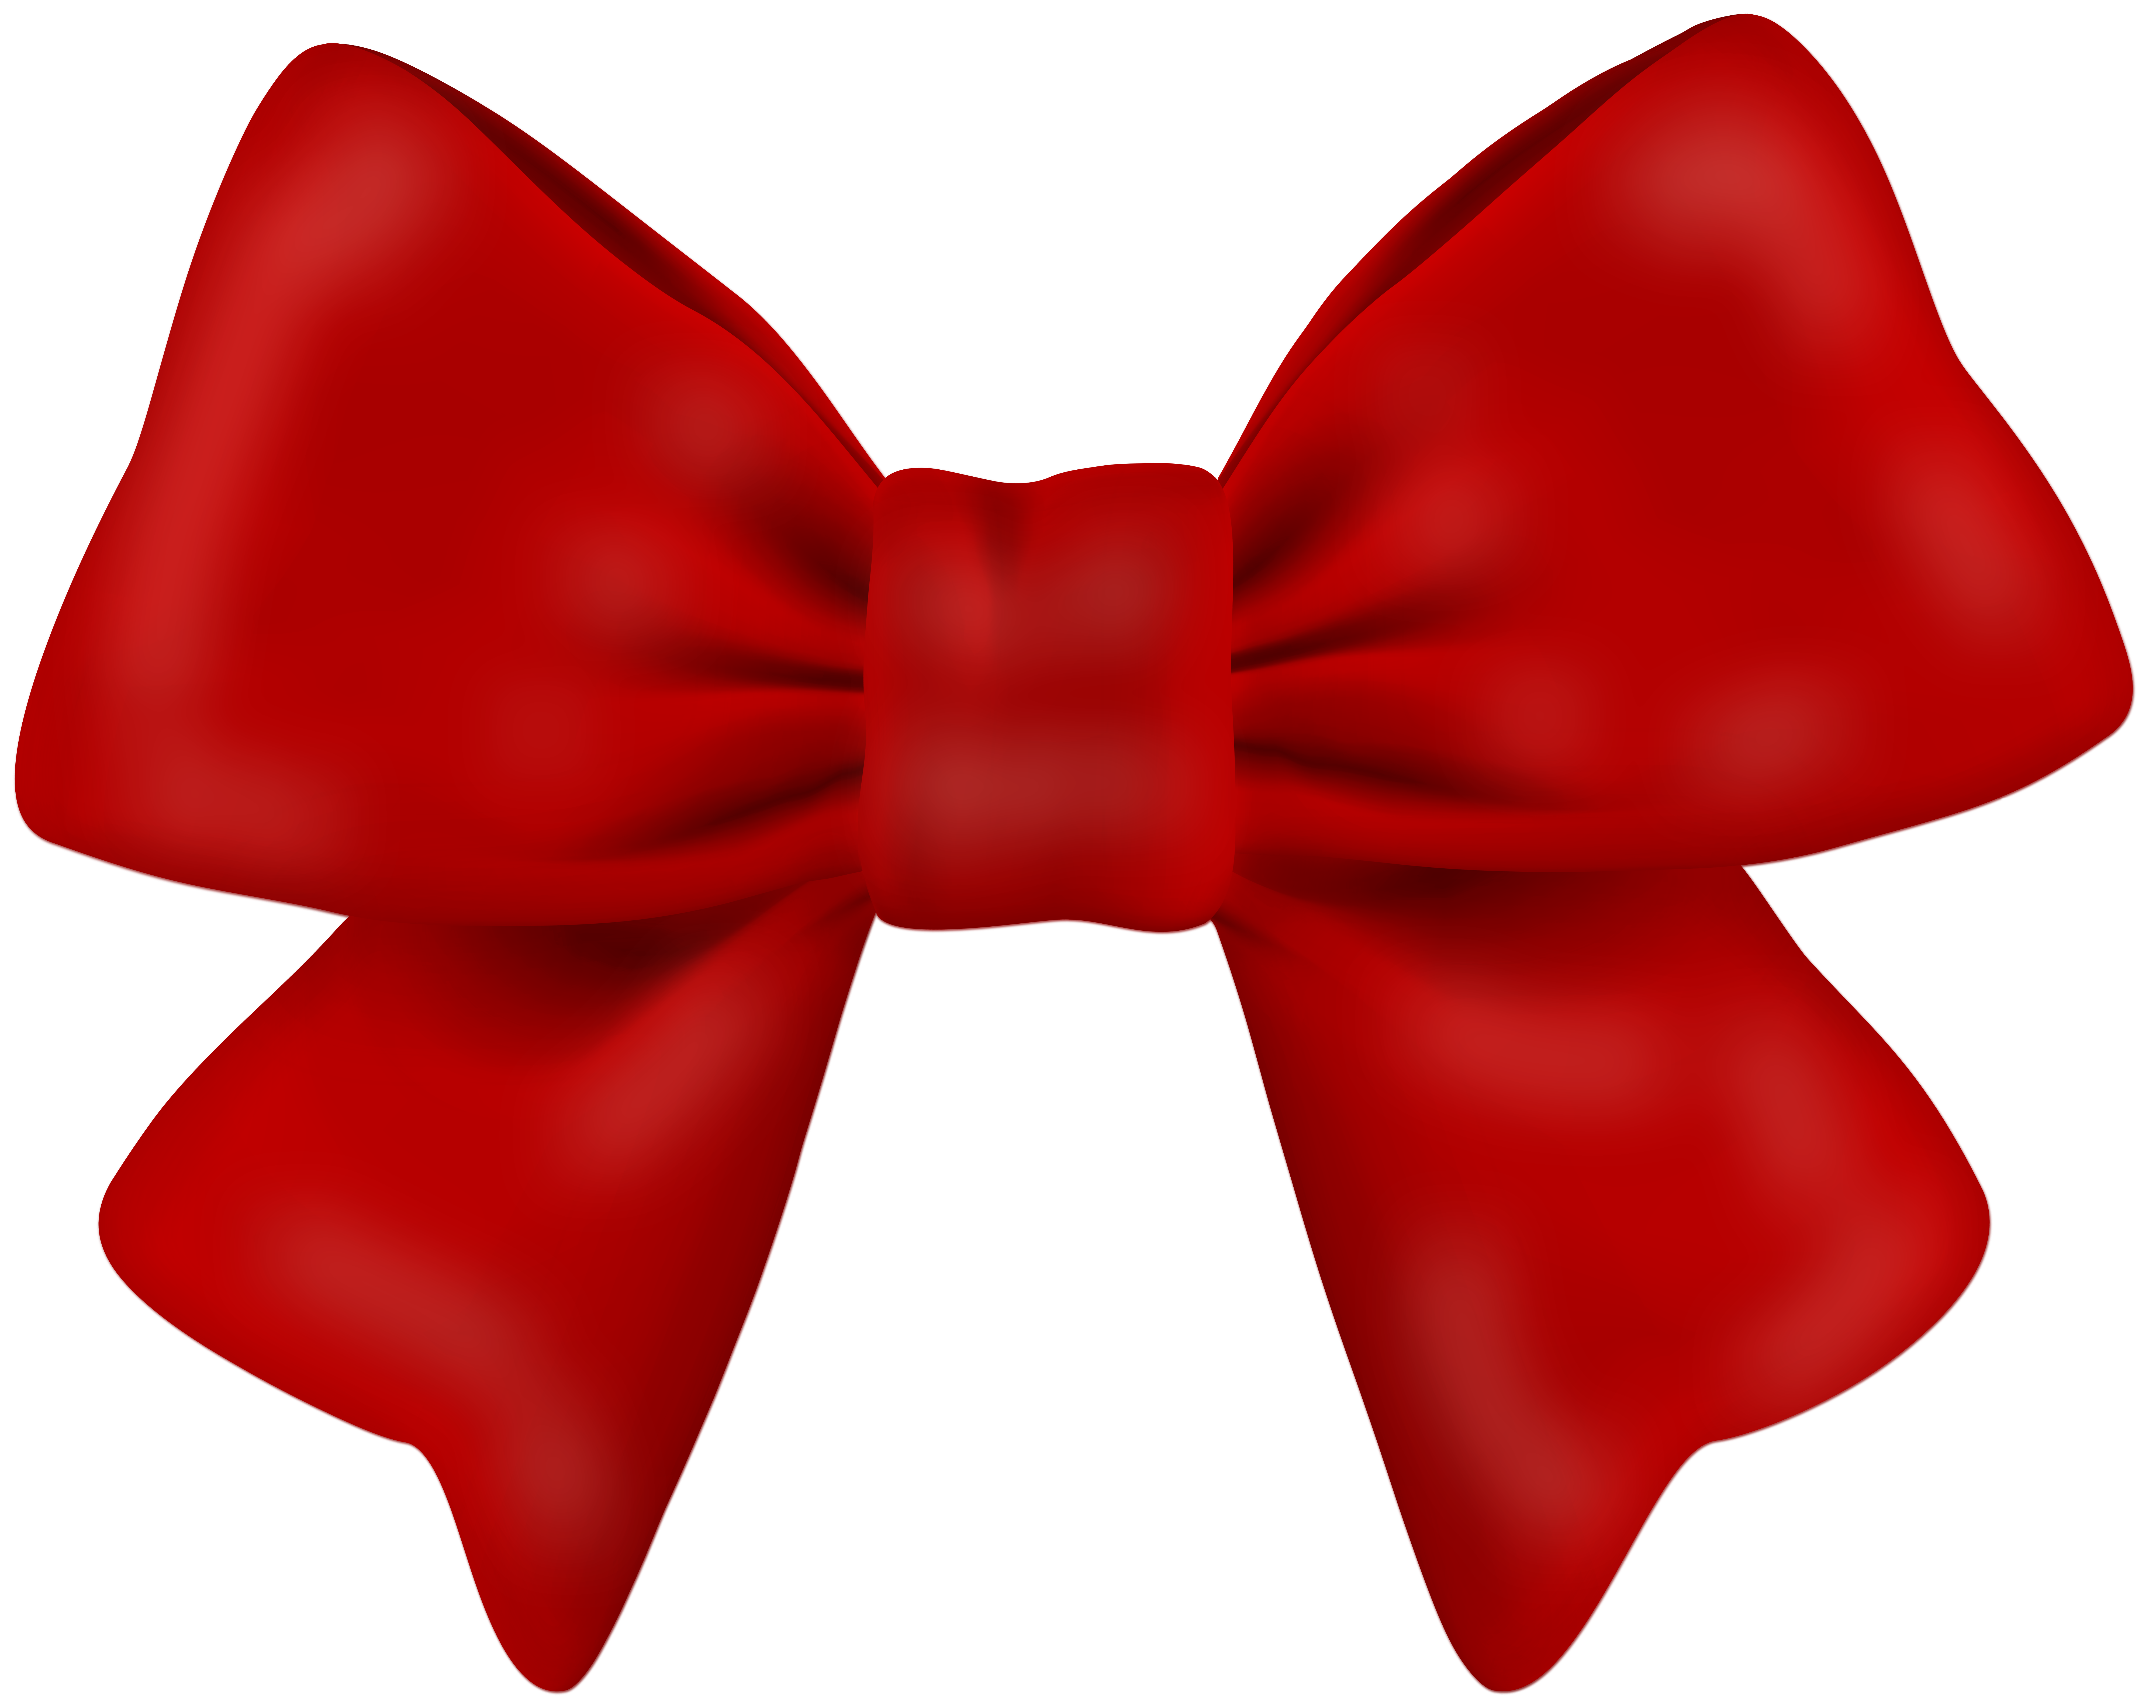 Red Ribbon PNG Clipart - Best WEB Clipart